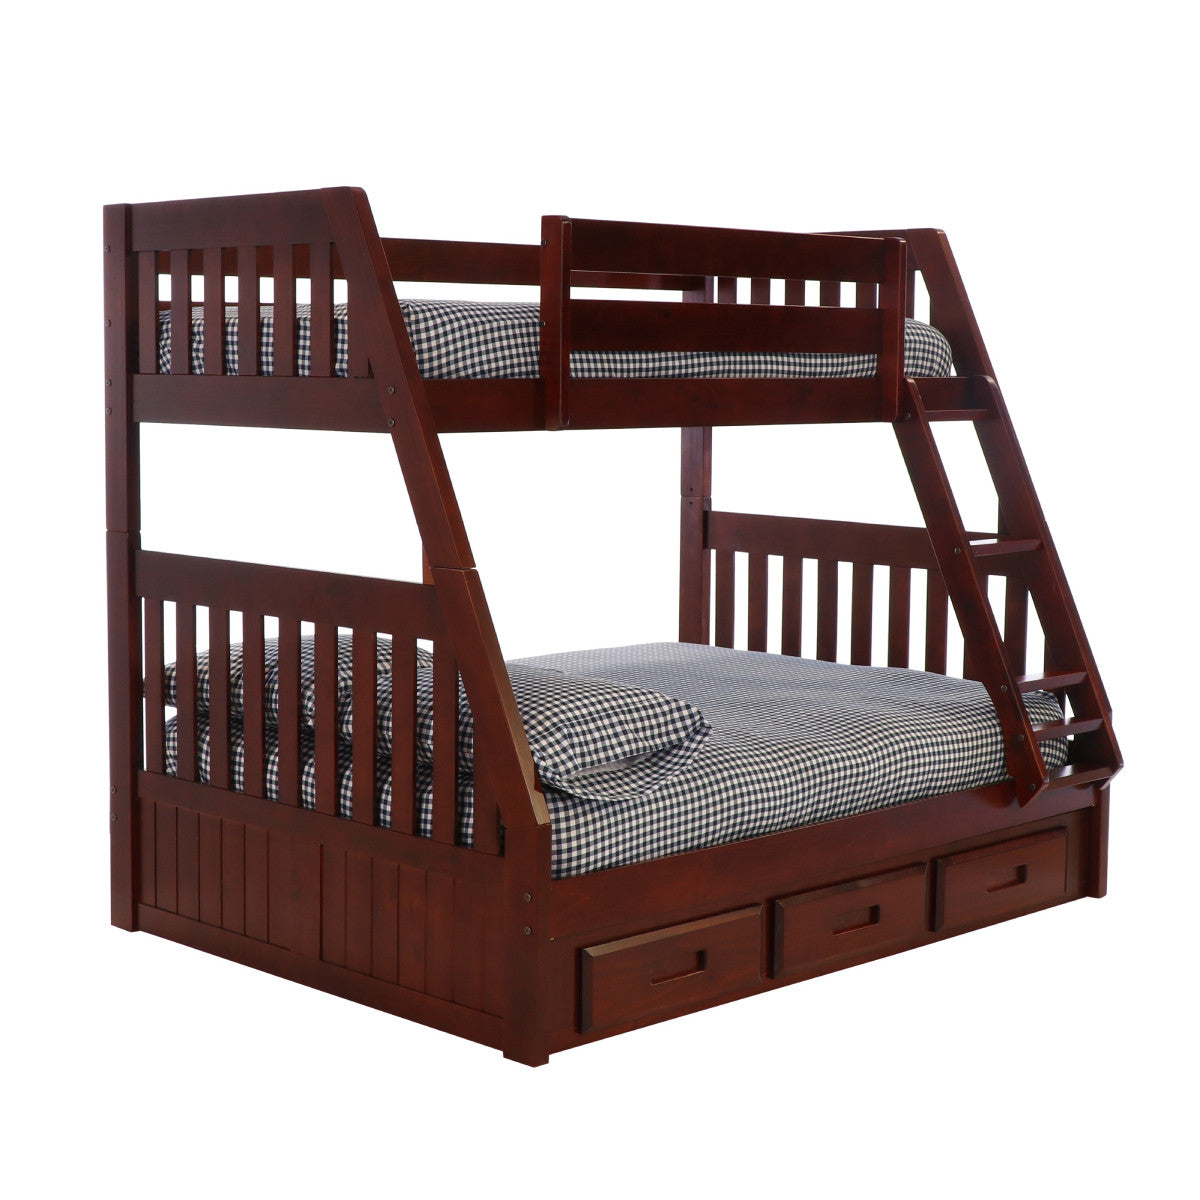 TWIN/FULL MISSION BUNK BED WITH 3 DRAWER BUNK PEDESTAL IN MERLOT FINISH